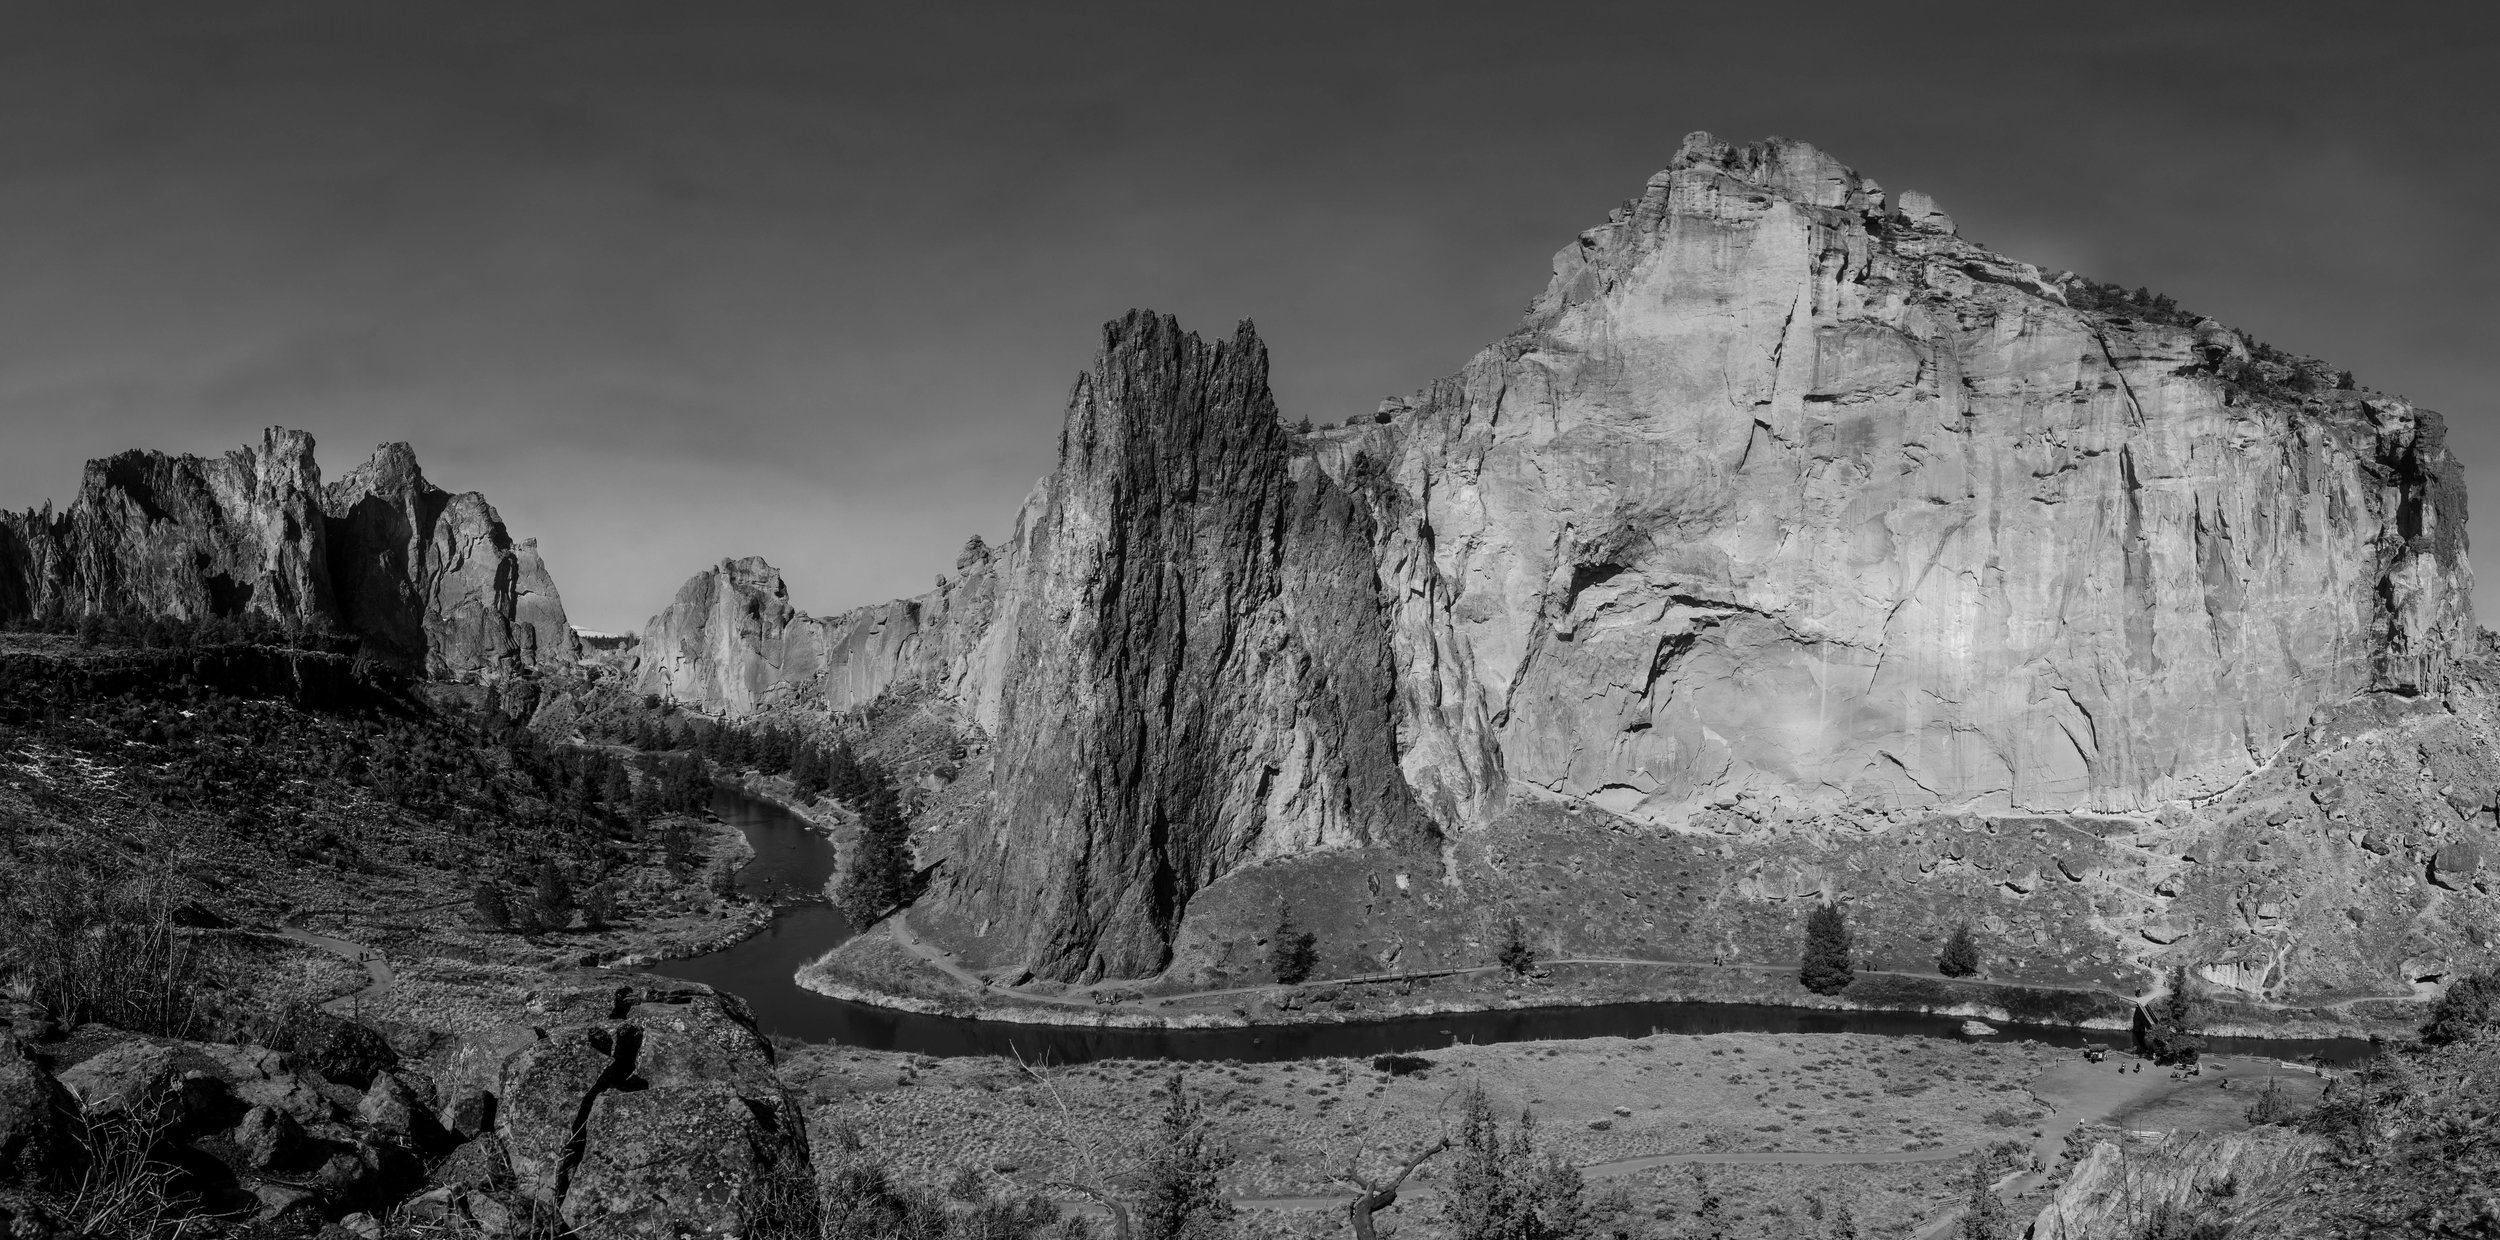 Smith Rock, Or; 2019